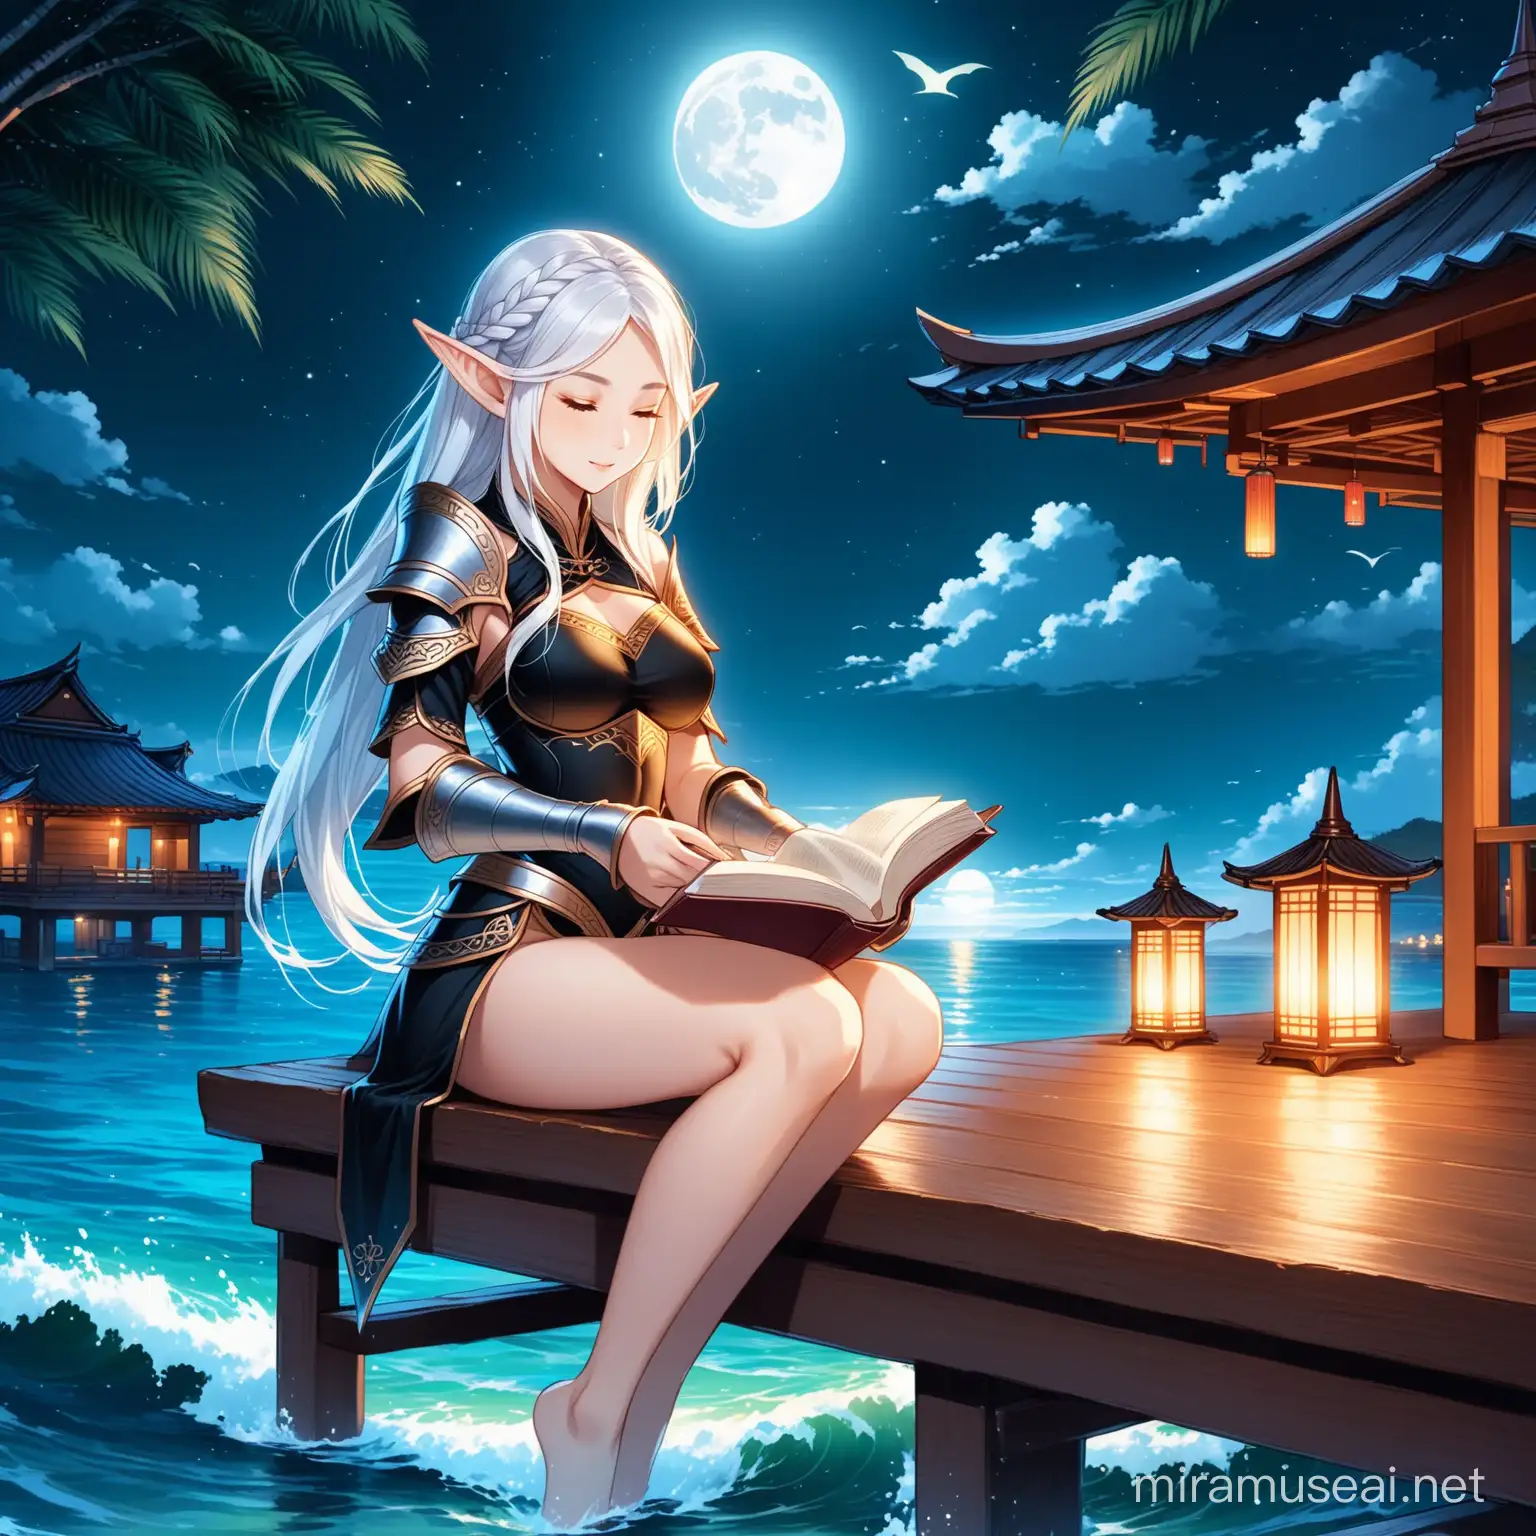 Create an image of a fantasy scene with an elf woman sitting at night on a wooden bench in a gazebo by the sea. The elf has long white hair braided on one side, pointed ears, and is wearing sexy black leather open fantasy armor. She's reading a book. The full and bright moon illuminates the sea and the traditional Asian-style wooden houses in the background. The sea is calm, with soft waves, and the atmosphere is serene and mysterious